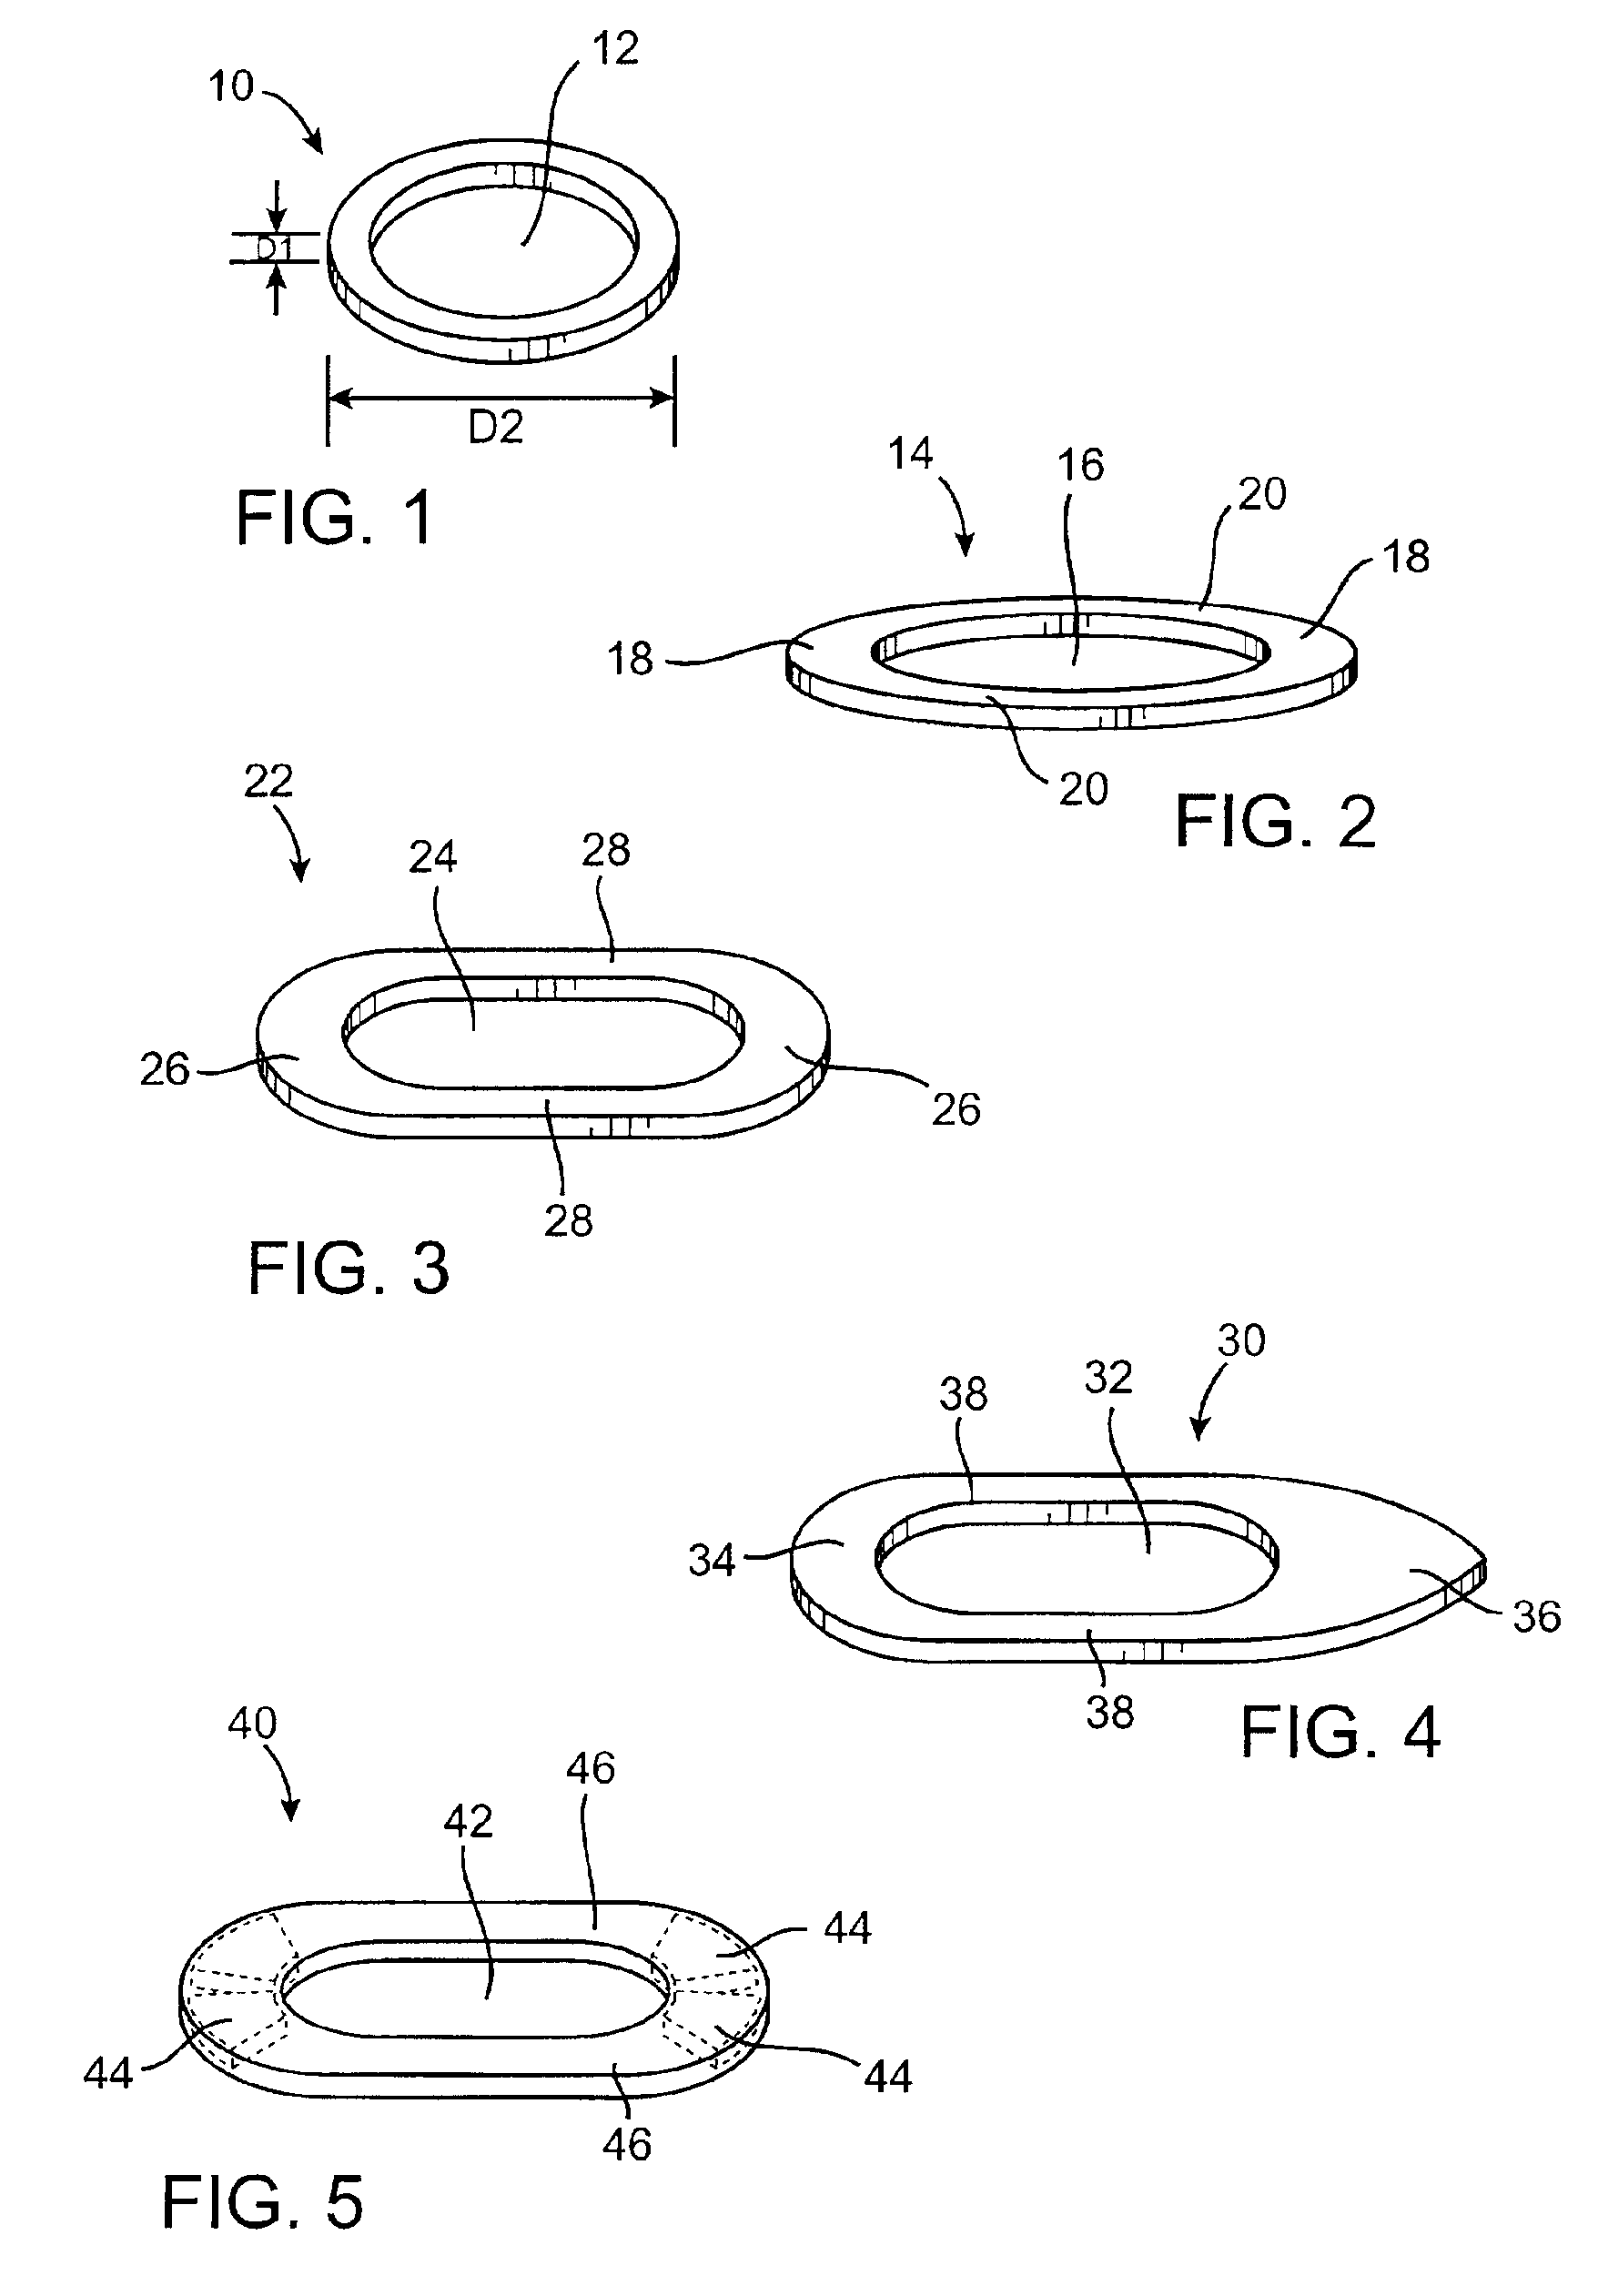 Methods and devices using magnetic force to form an anastomosis between hollow bodies